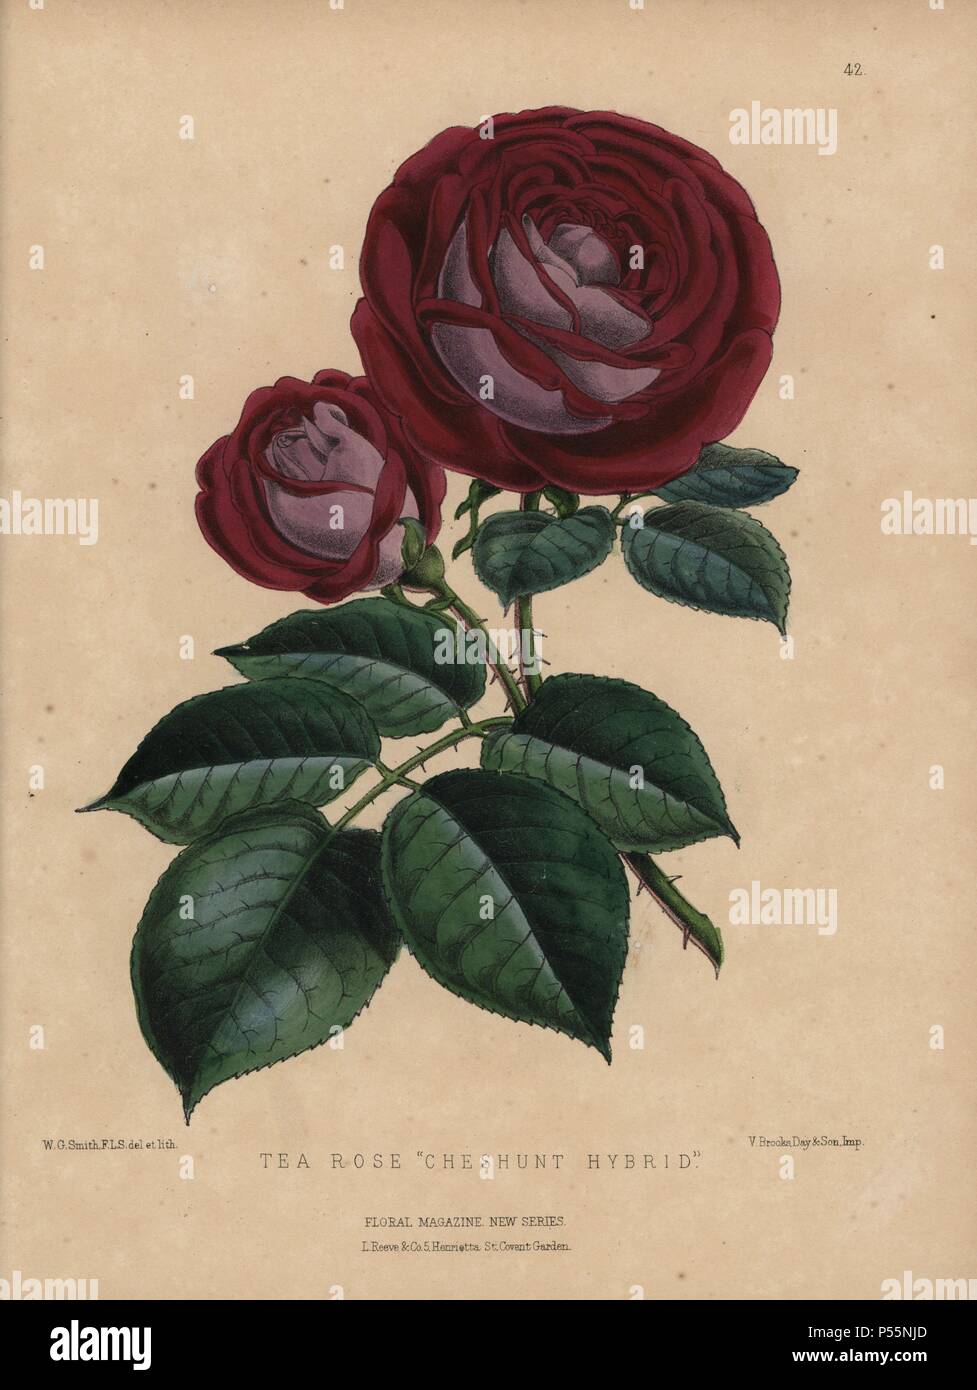 Crimson and mauve tea rose 'Cheshunt hybrid'. Rosa gigantea, Rosa chinensis . Hybrid introduced by George Paul of the Paul & Son nursery in Cheshunt, Hertfordshite.. Handcolored botanical drawn and lithographed by W.G. Smith from H.H. Dombrain's 'Floral Magazine' 1872.. Worthington G. Smith (1835-1917), architect, engraver and mycologist. Smith also illustrated 'The Gardener's Chronicle.' Henry Honywood Dombrain (1818-1905), clergyman gardener, was editor of the 'Floral Magazine' from 1862 to 1873. Stock Photo